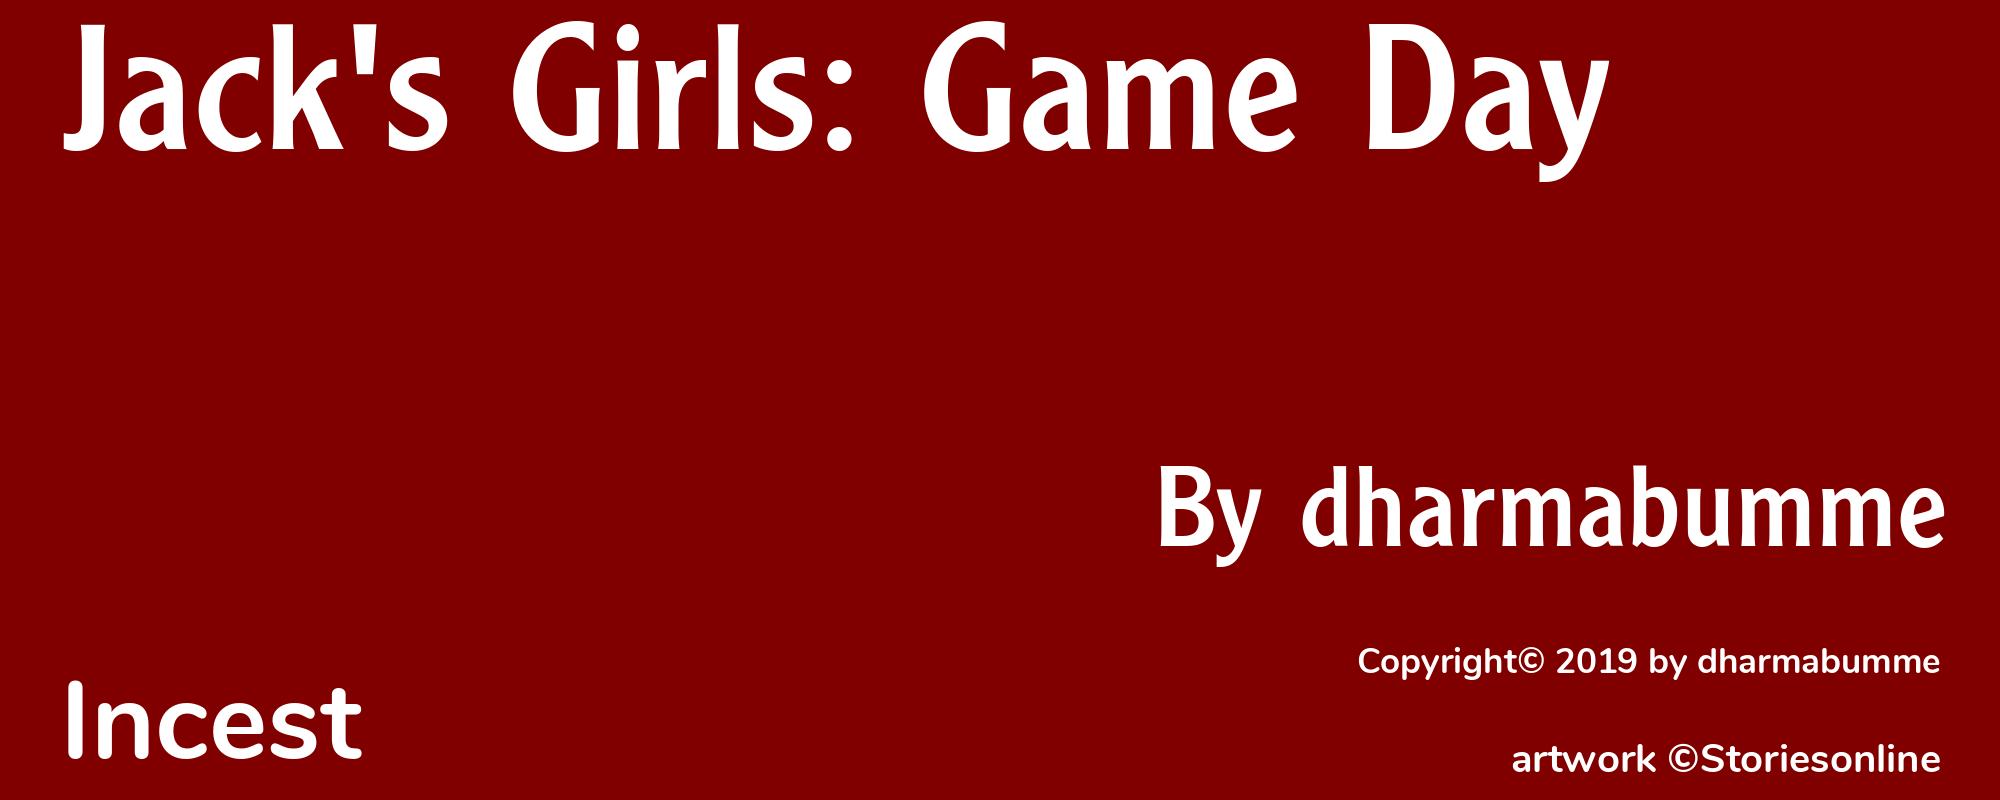 Jack's Girls: Game Day - Cover